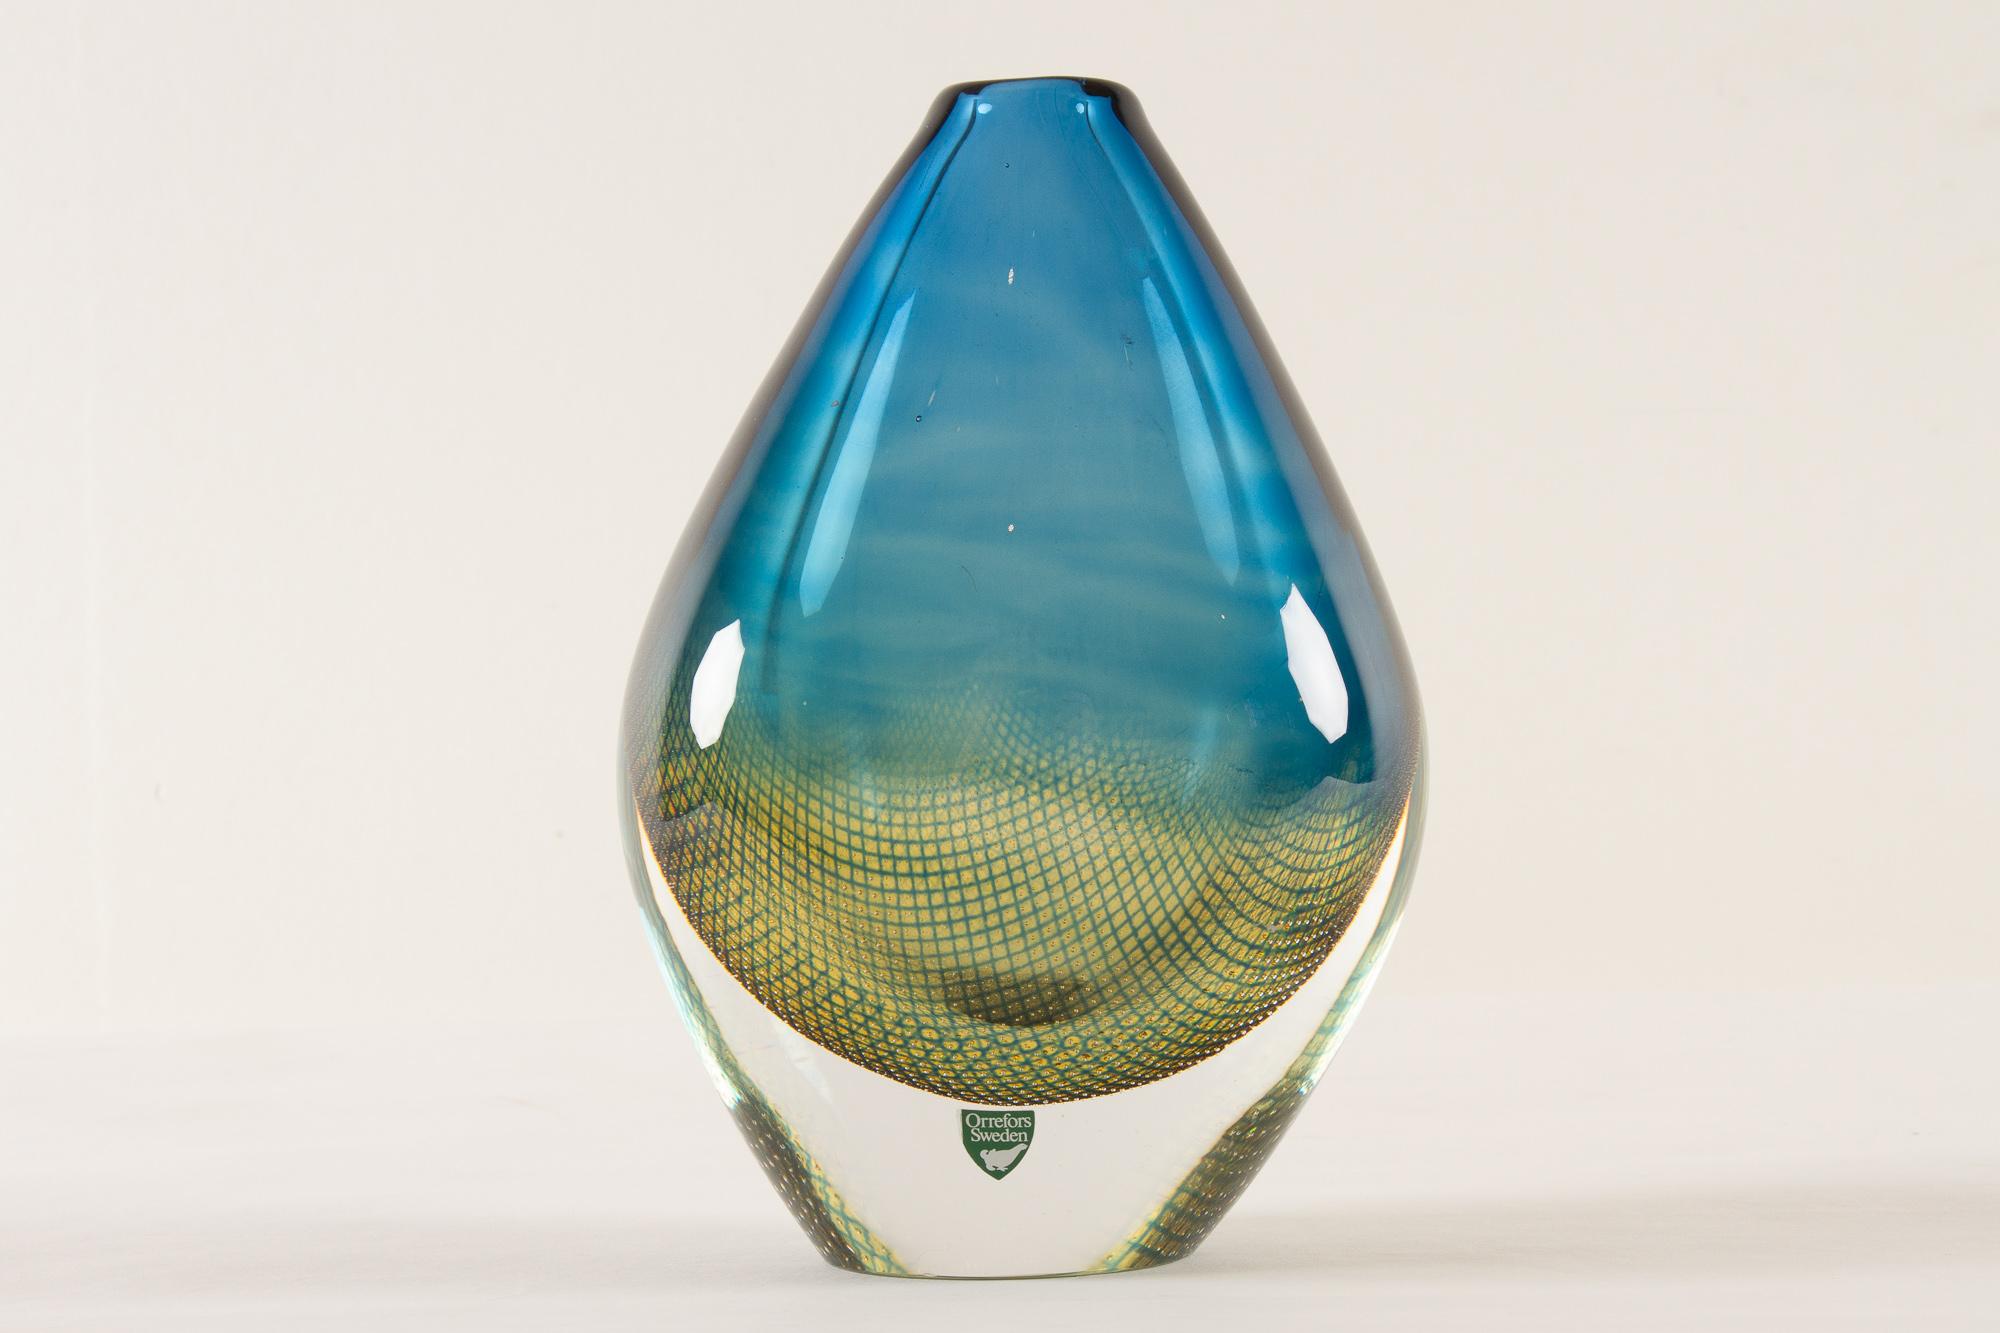 Mid-century Kraka glass vase by Sven Palmqvist for Orrefors, 1960s
Tear shaped hand blown clear glass vase with blue and green curved net pattern with tiny inlaid air bubbles.
This is a shop display piece with engraved 